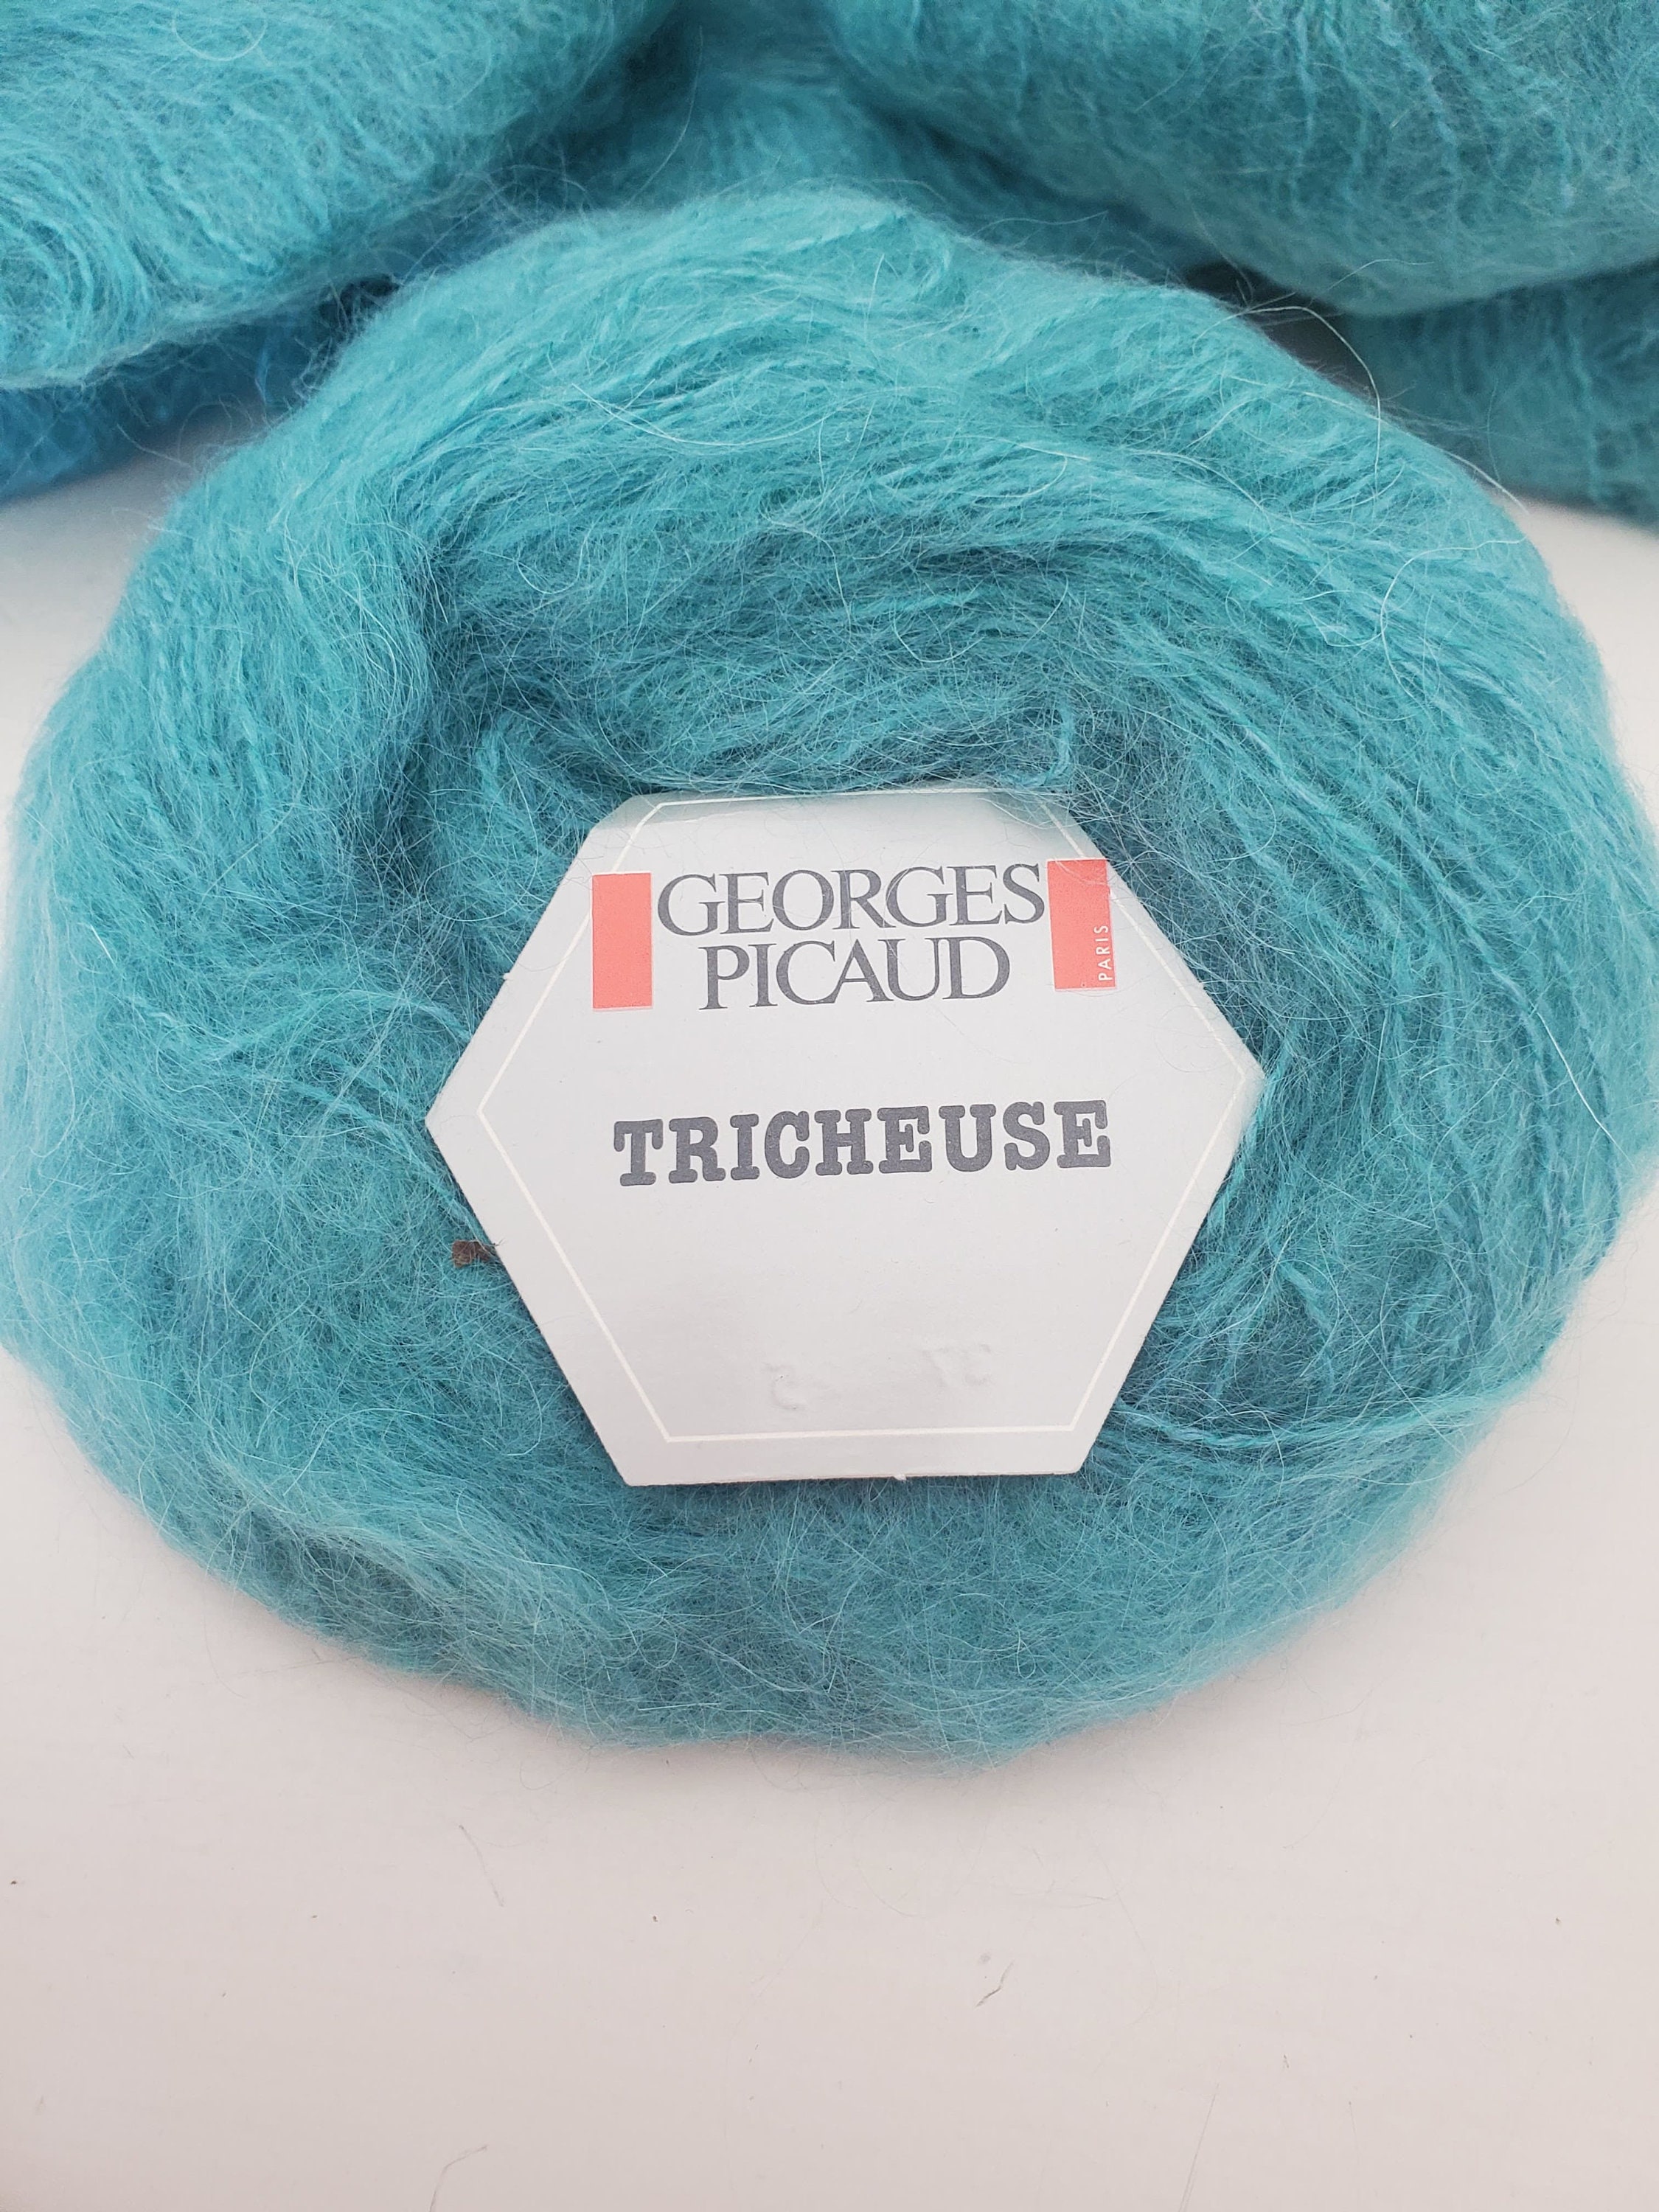 Georges Picaud Paris Rebelle Shimmery Twist Novelty Yarn Acrylic Cotton  Viscose